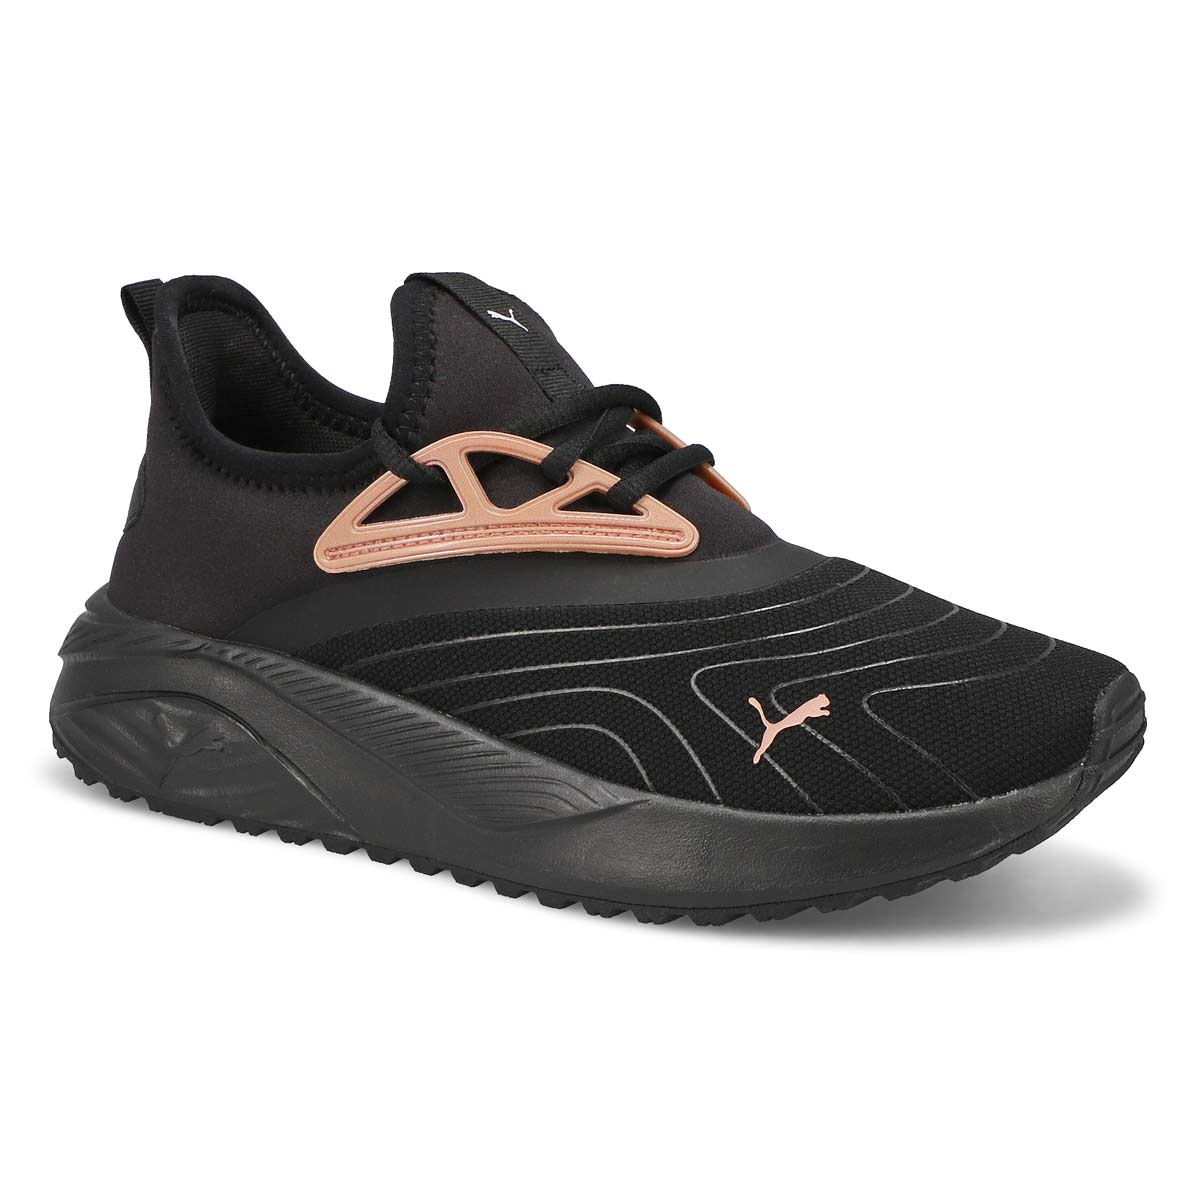 Women's Pacer Beauty Lace Up Sneaker - Black/Rose